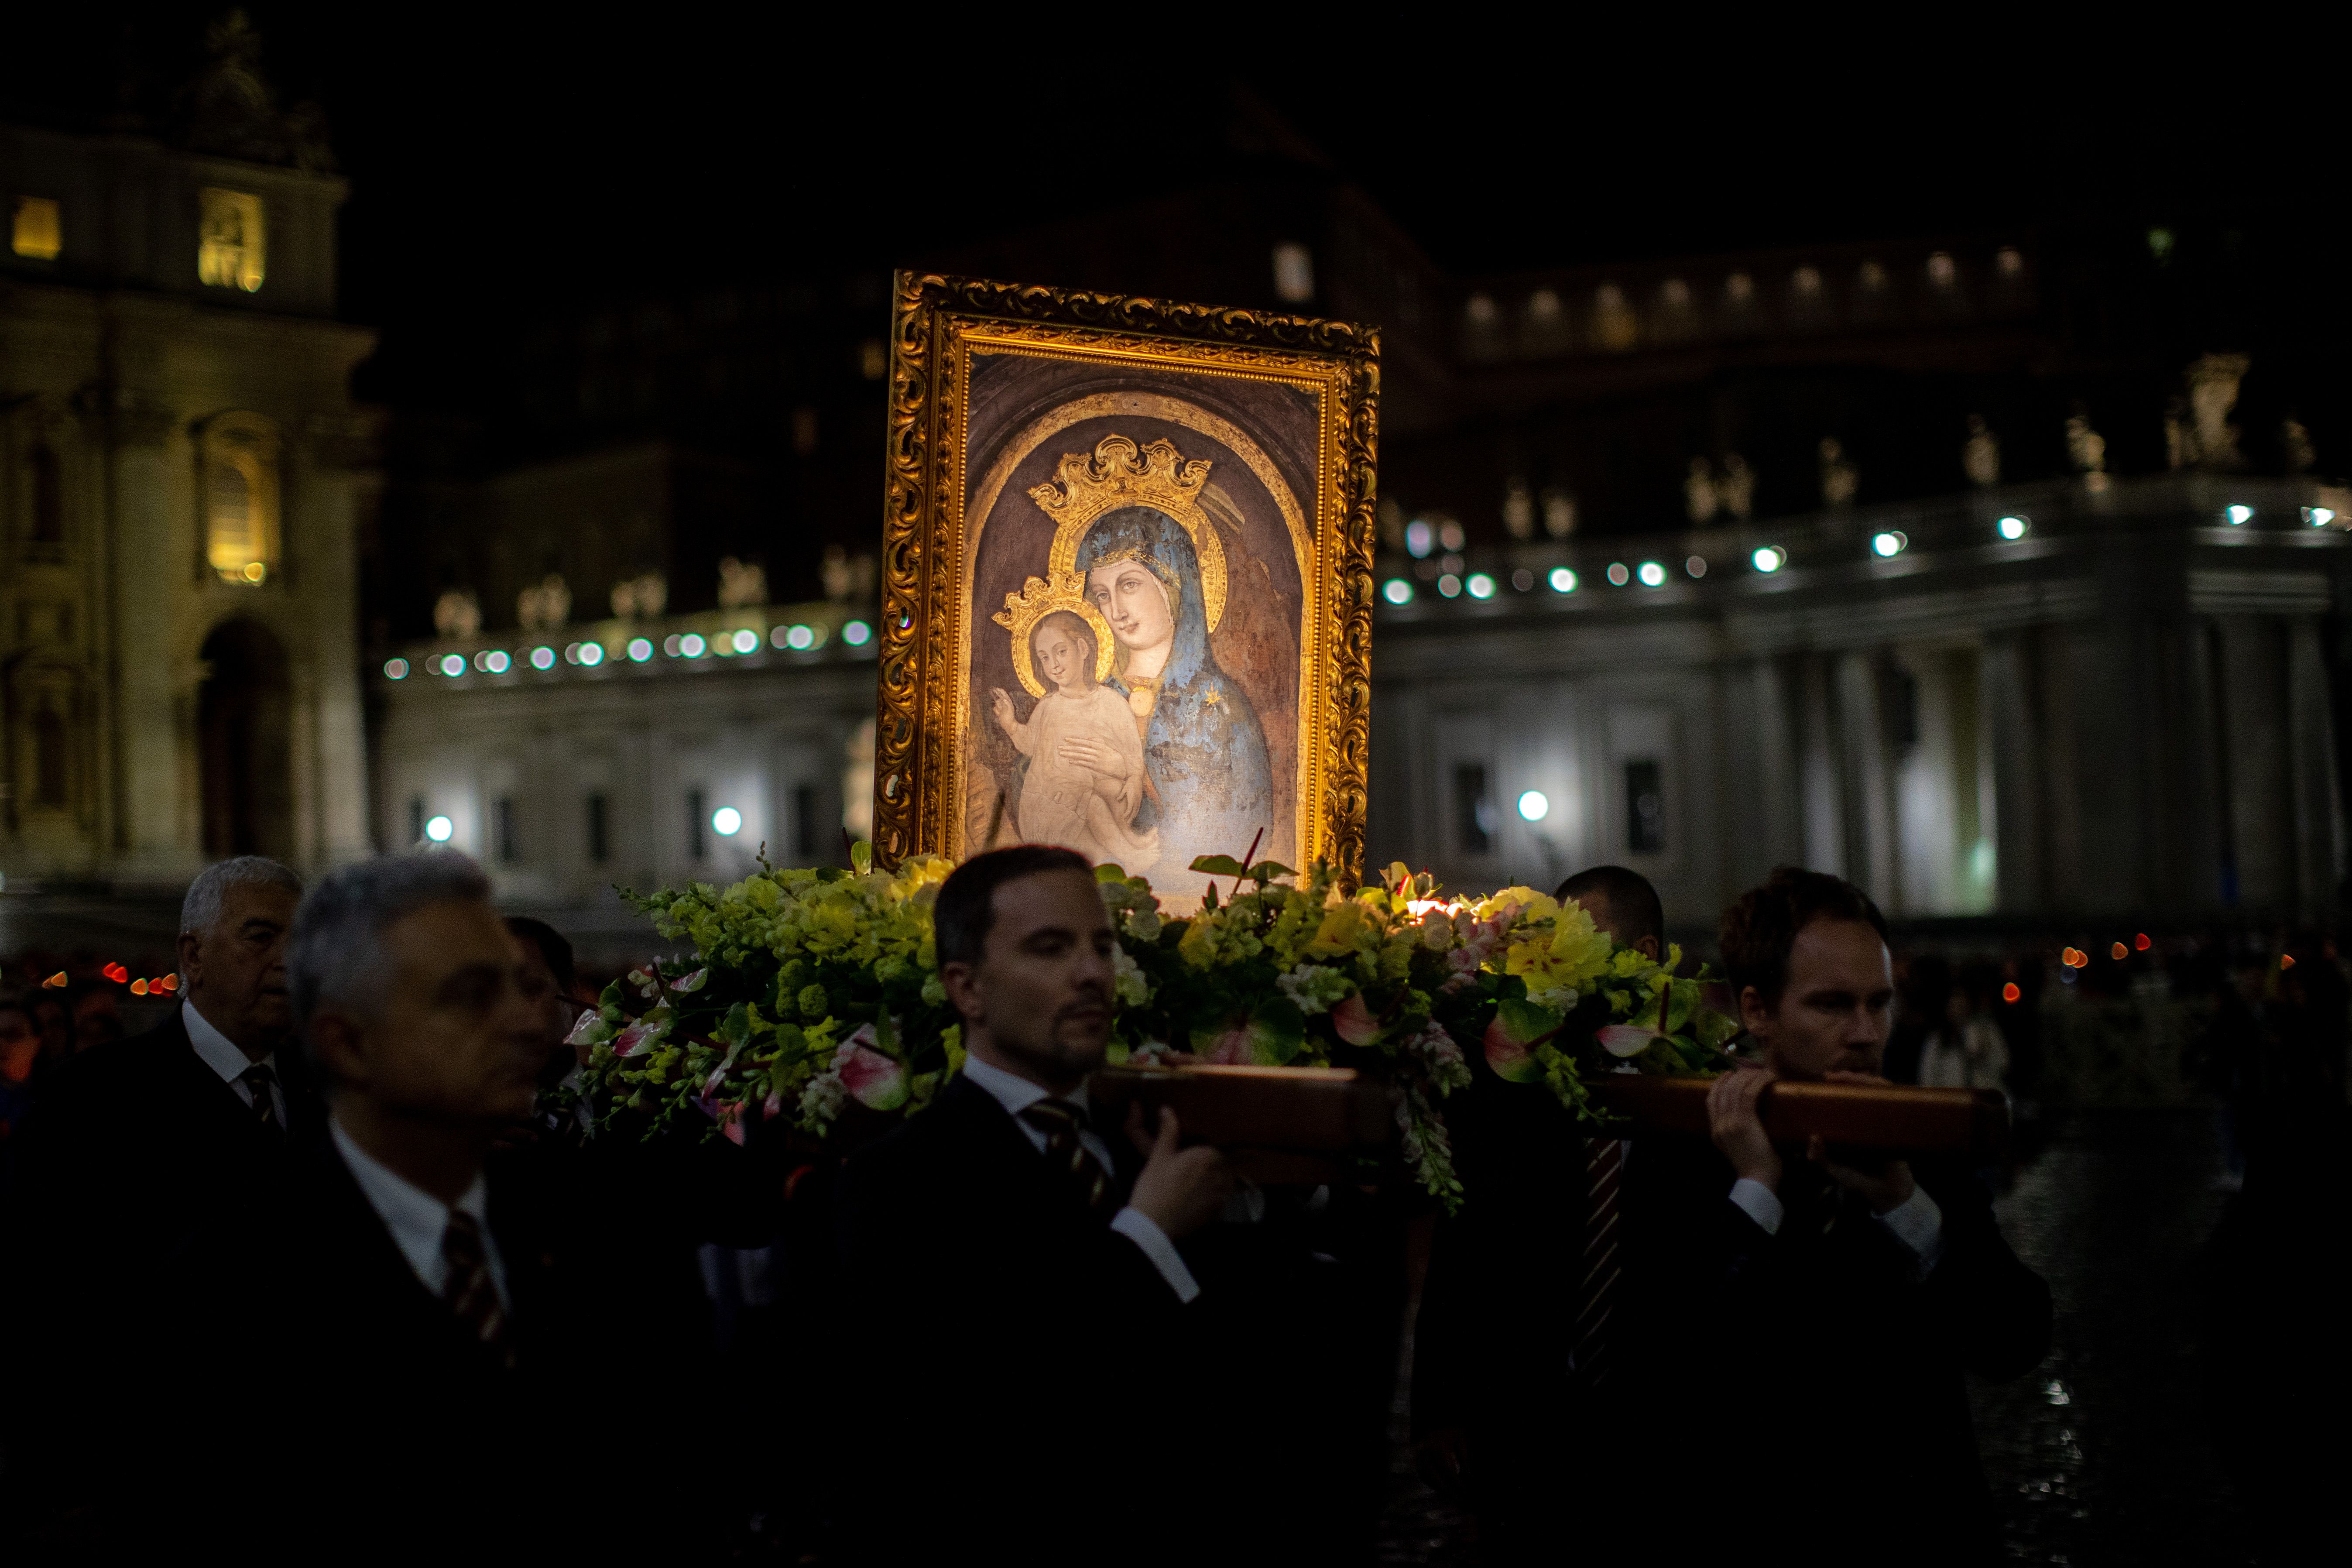 PHOTOS: Rosary procession in St. Peter’s Square honors the Blessed Virgin Mary